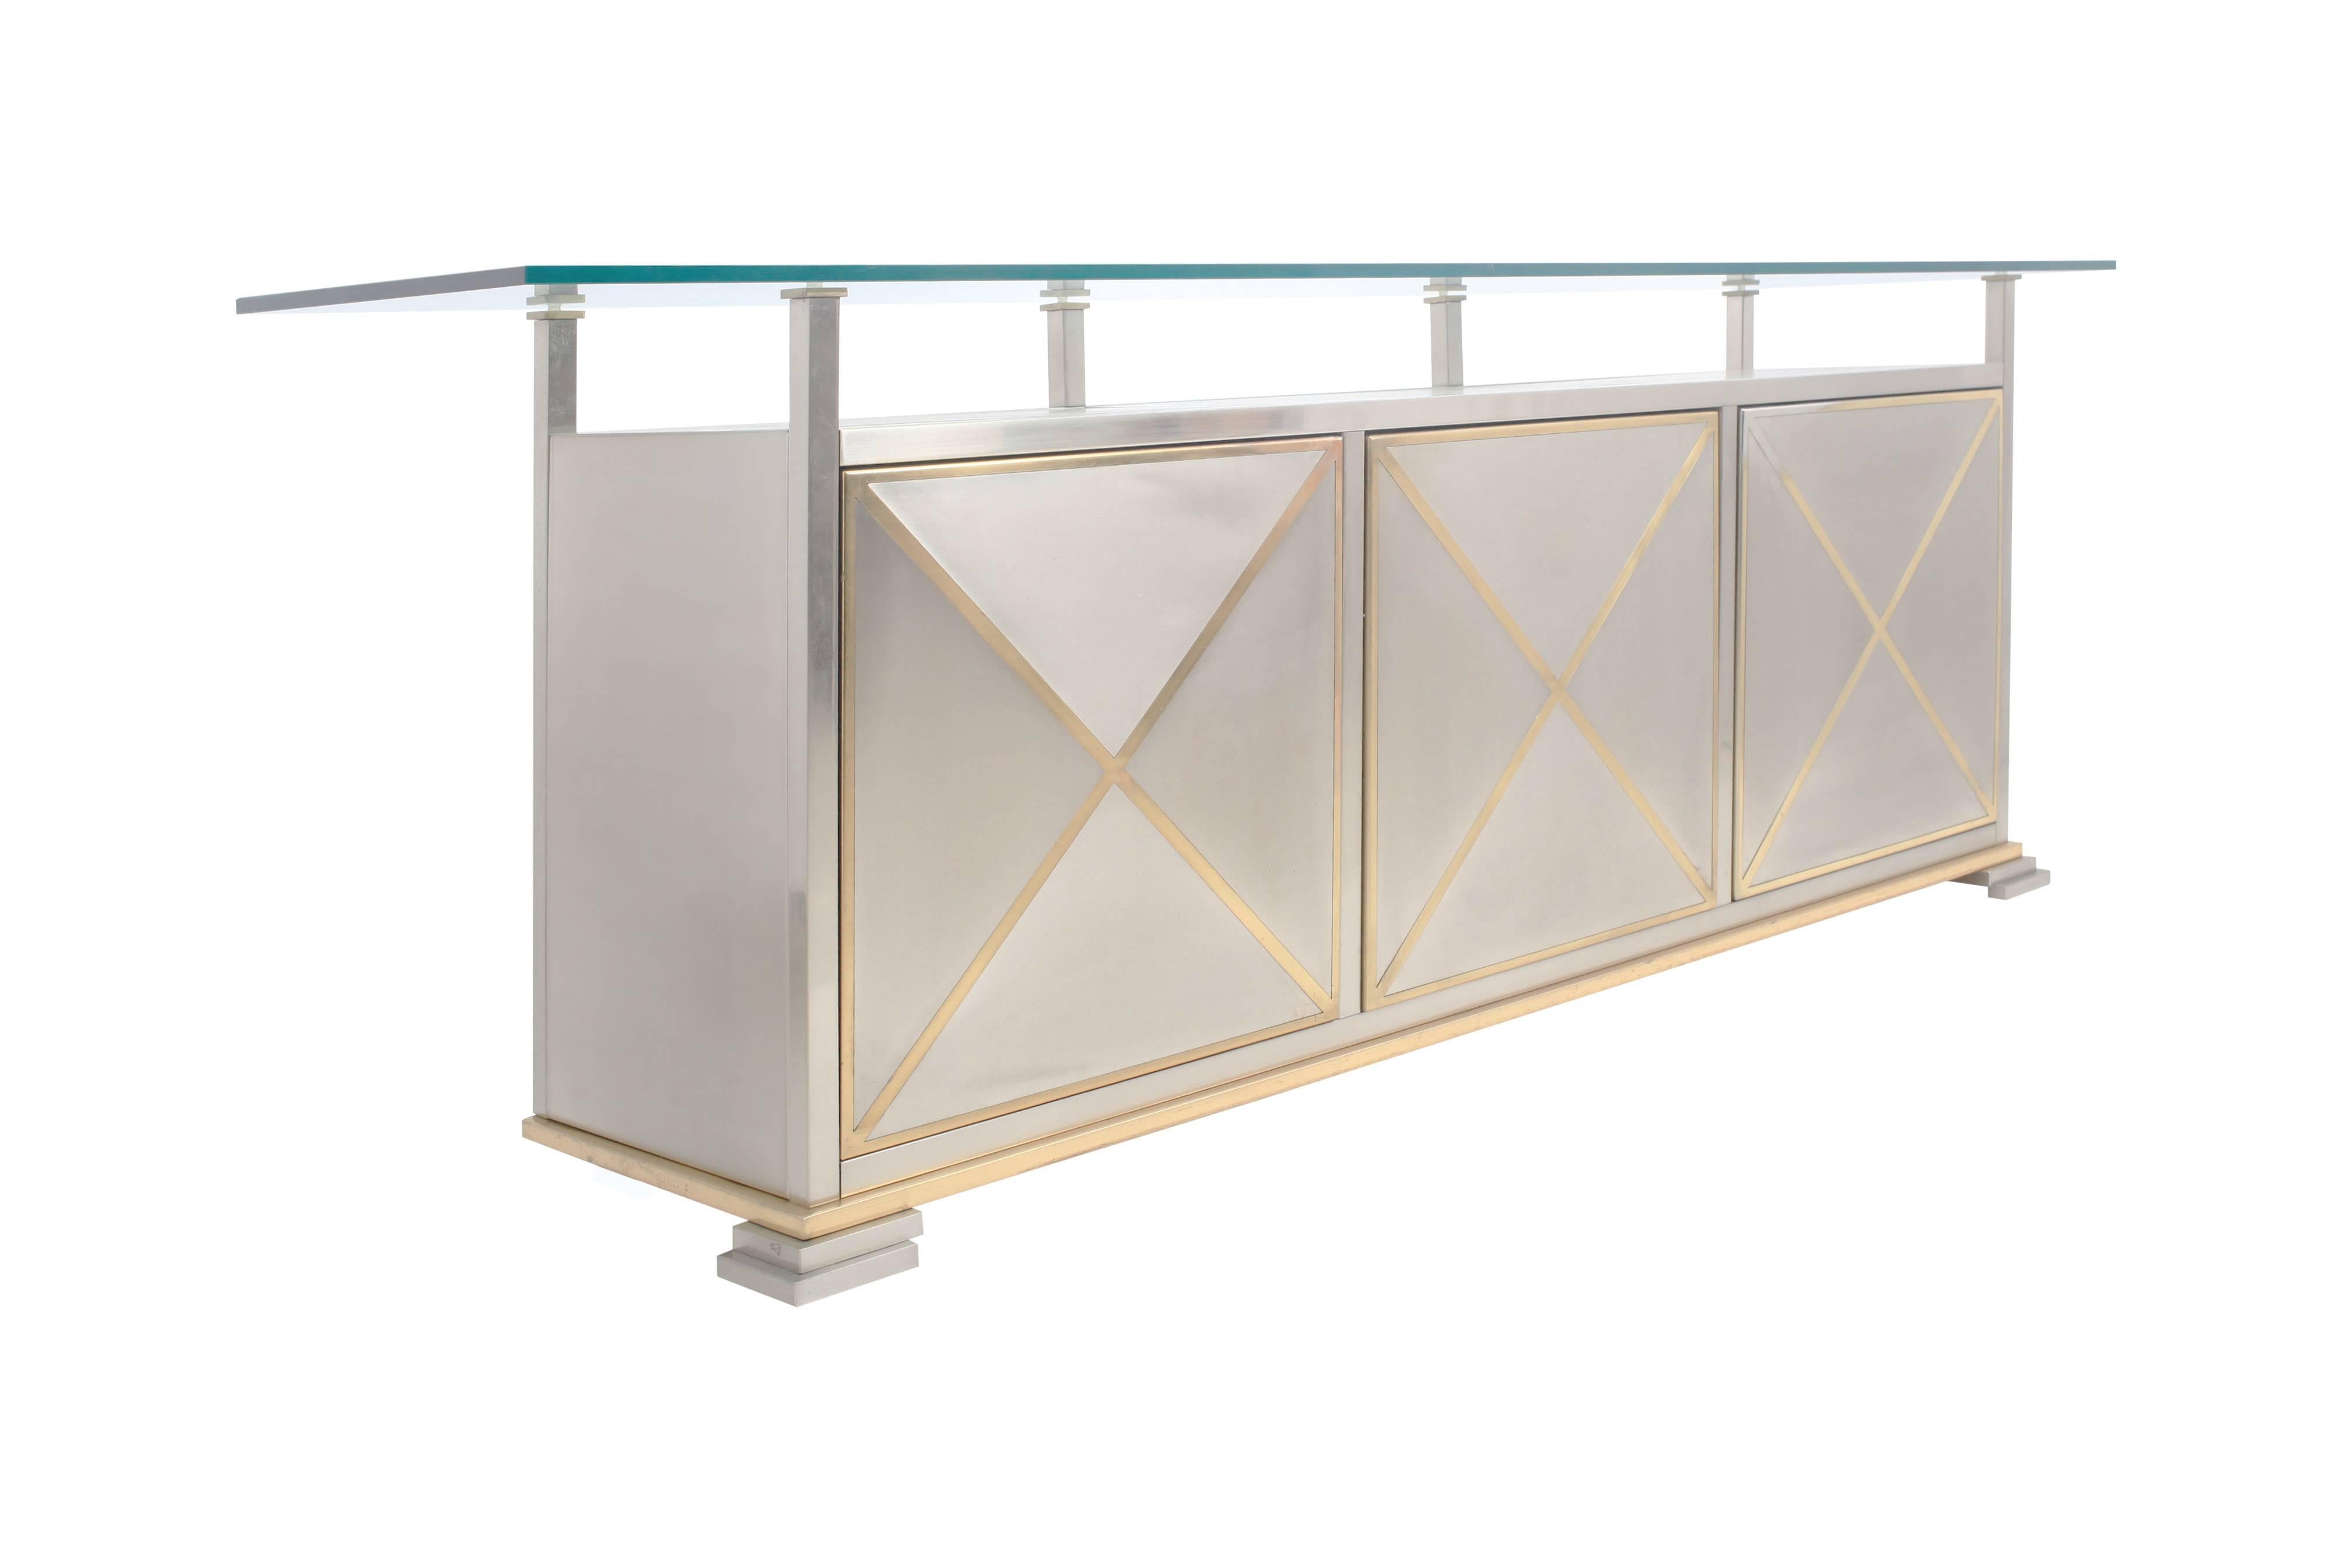 Regency Maison Jansen Credenza with Clear Glass Top